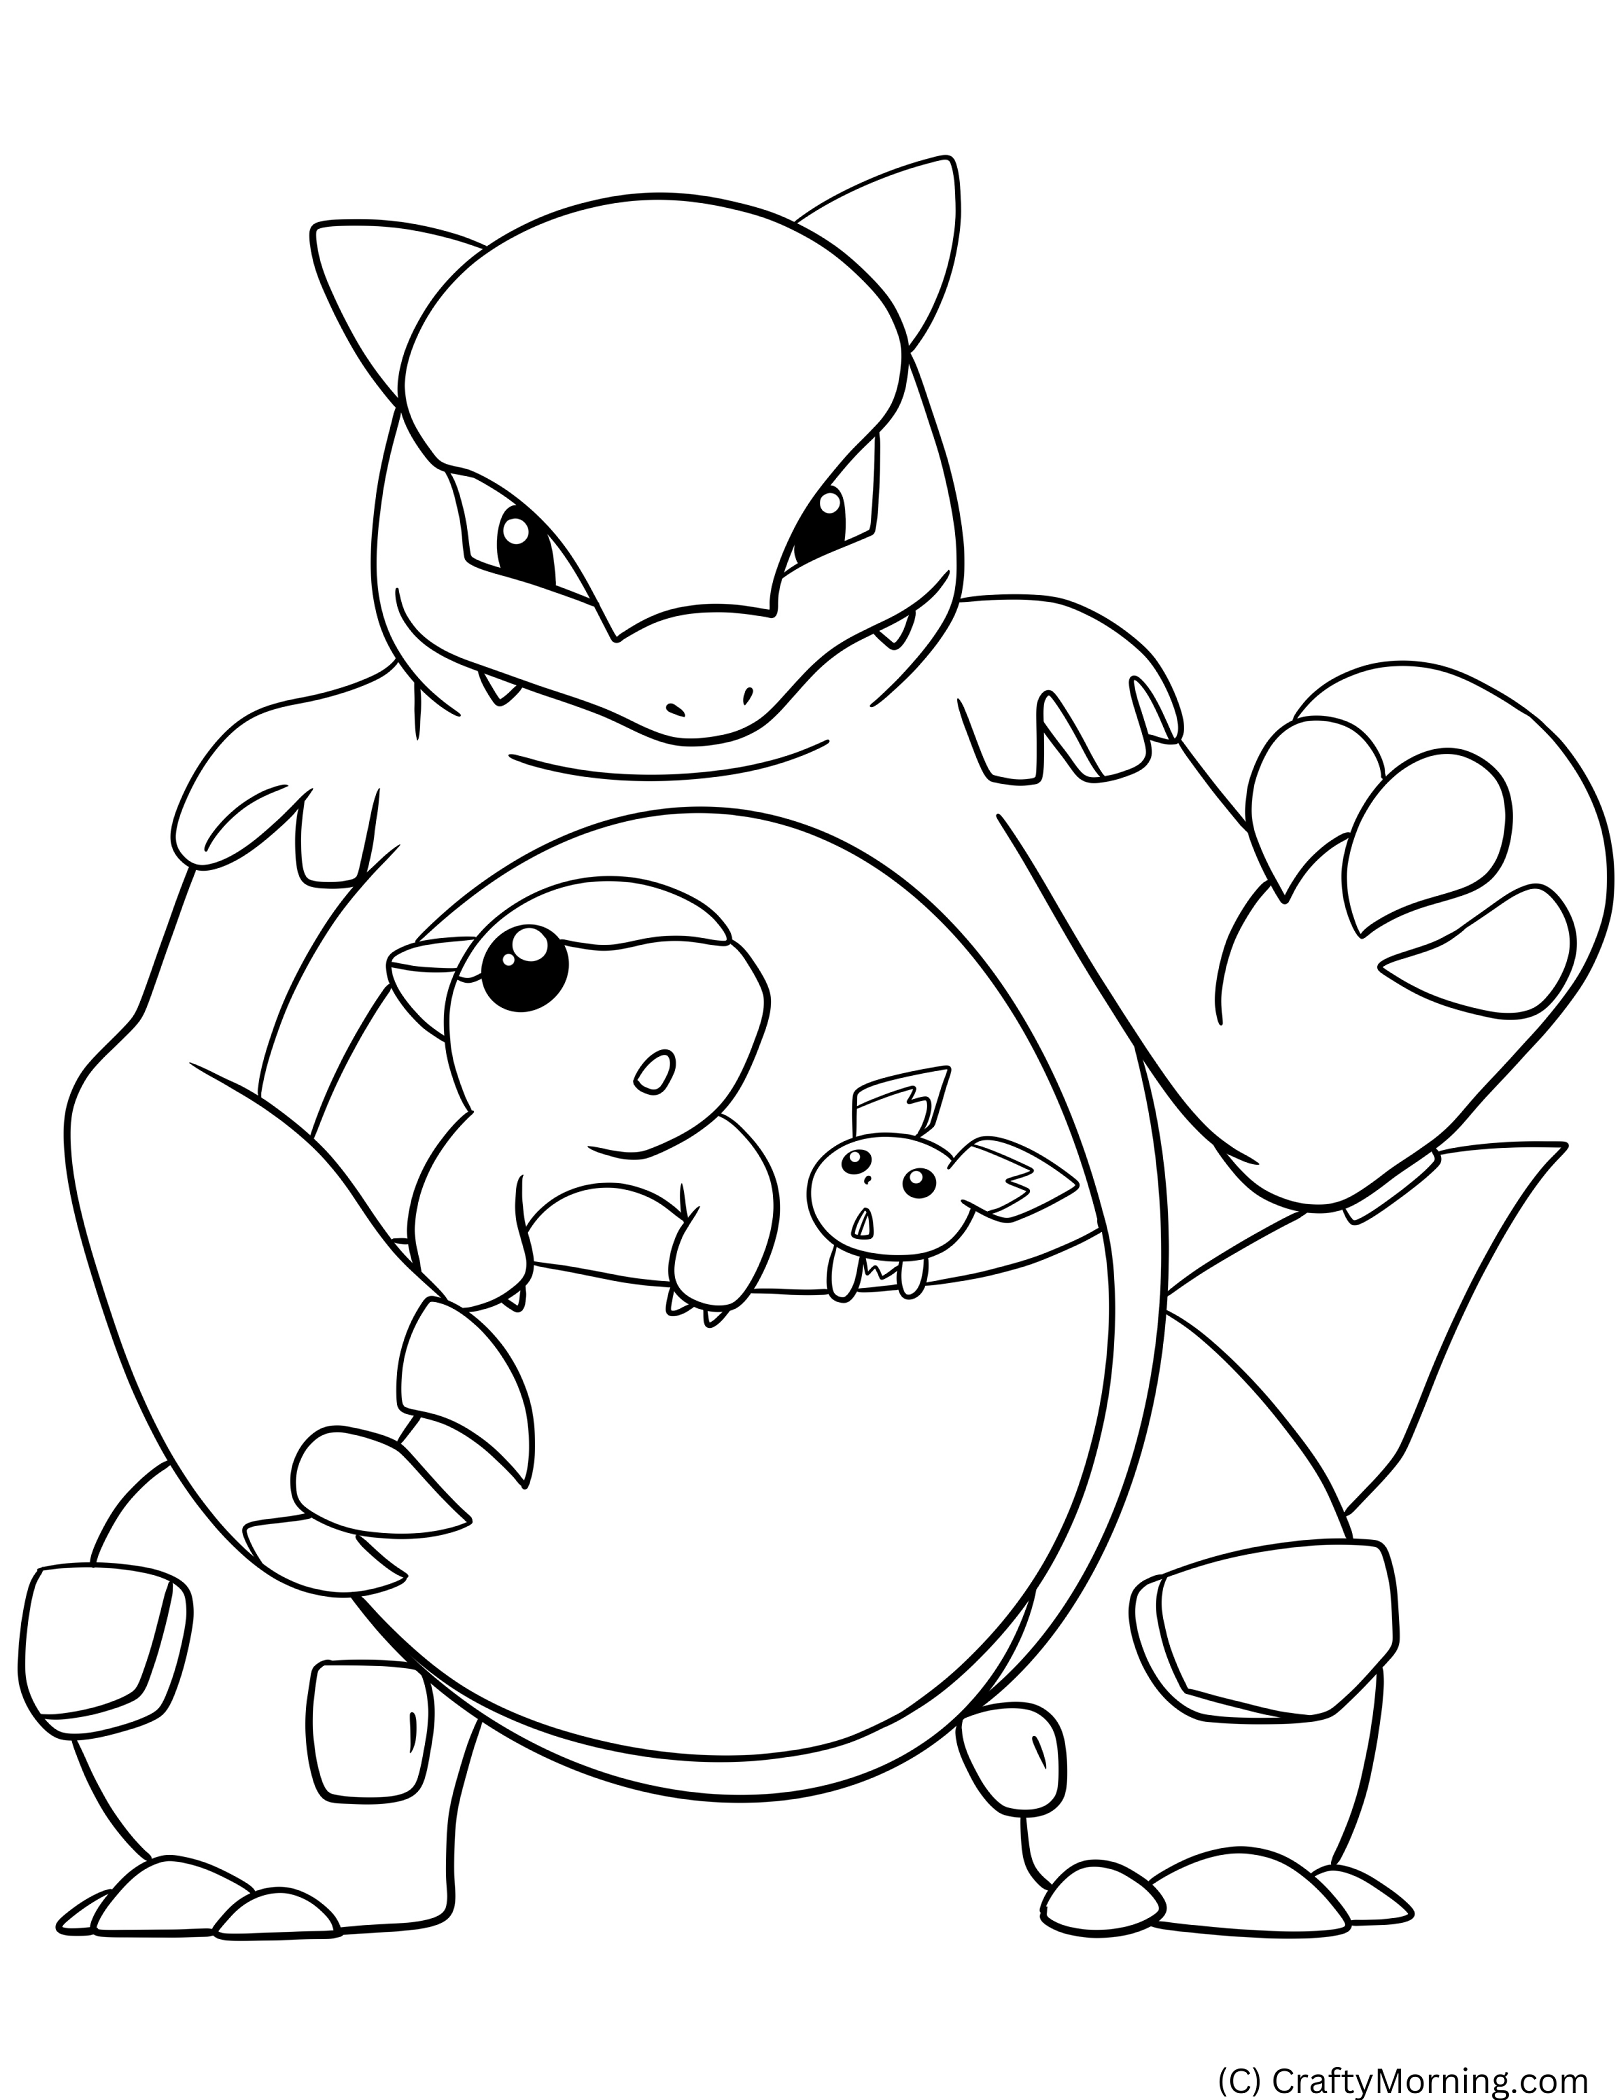 Top 93 Free Printable Pokemon Coloring Pages Online  Pokemon coloring  pages, Pokemon coloring, Pokemon coloring sheets